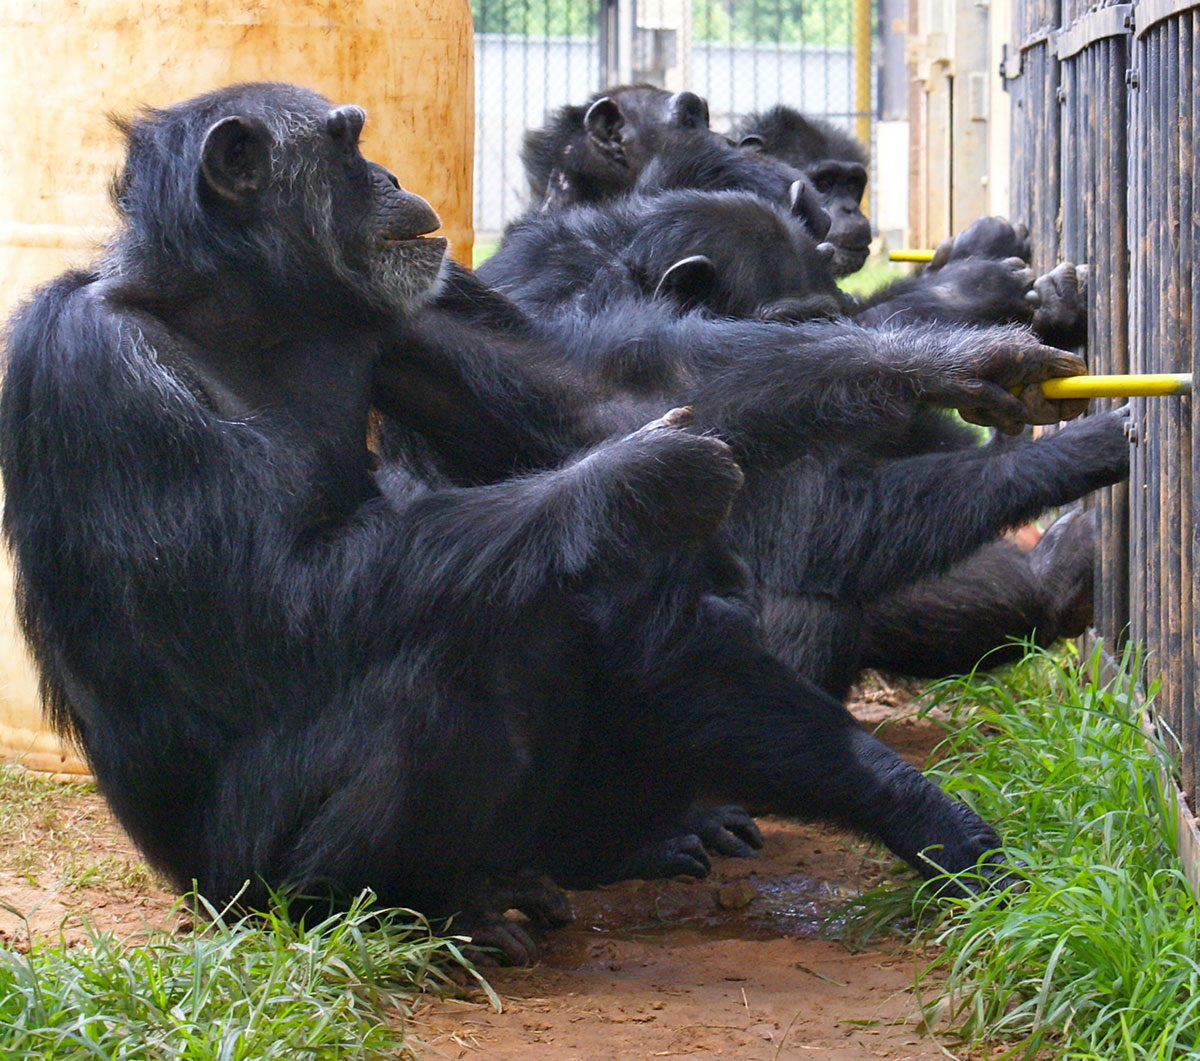 Cooperation not competition: How chimpanzees work together ...